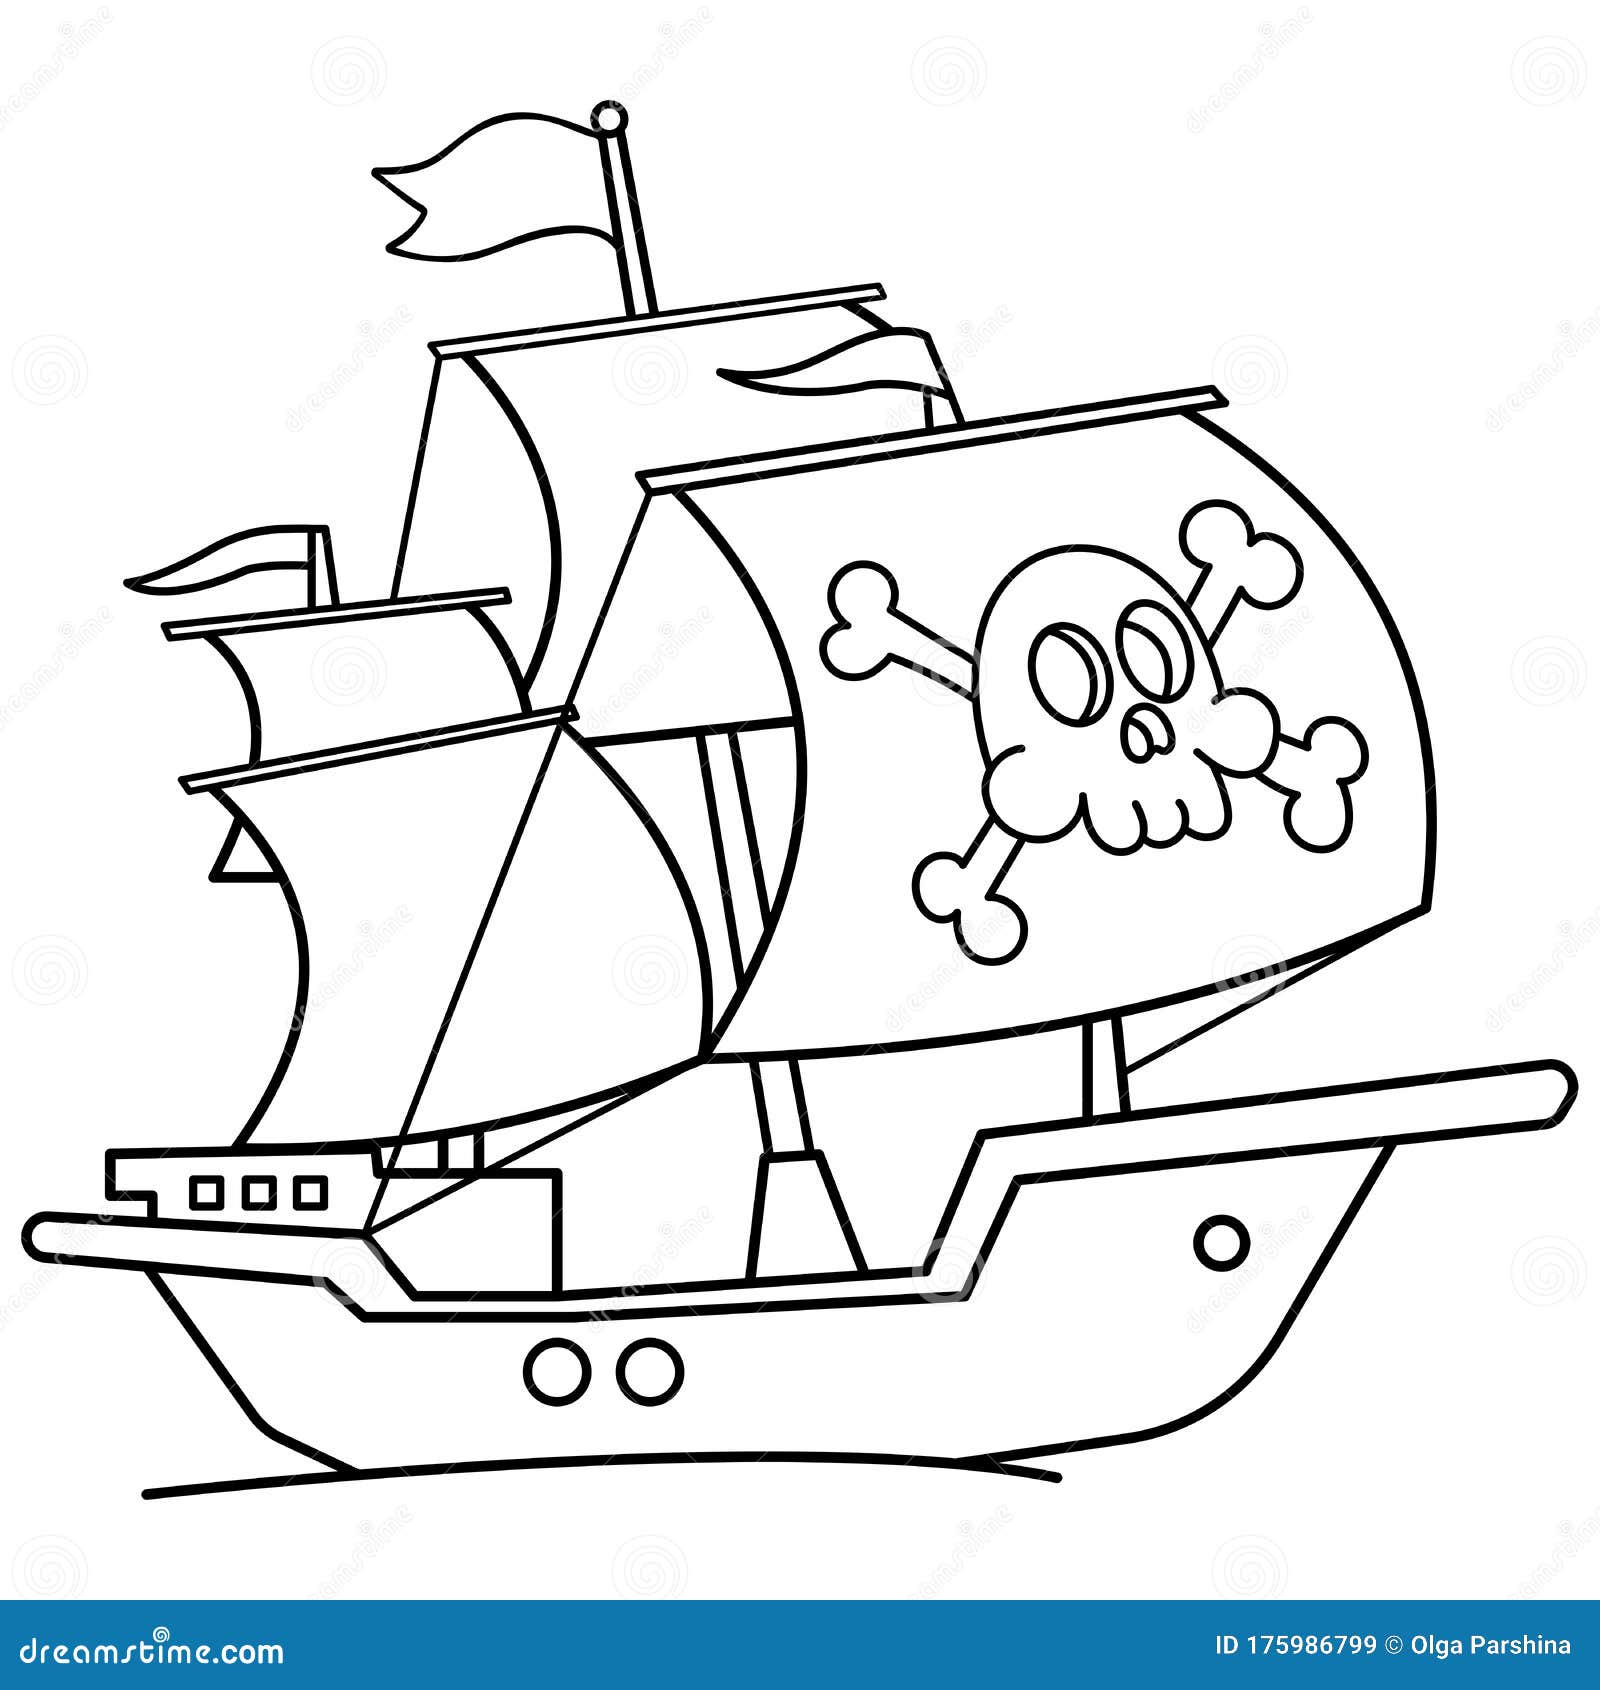 1500 Pirate Ship Drawing Stock Photos Pictures  RoyaltyFree Images   iStock